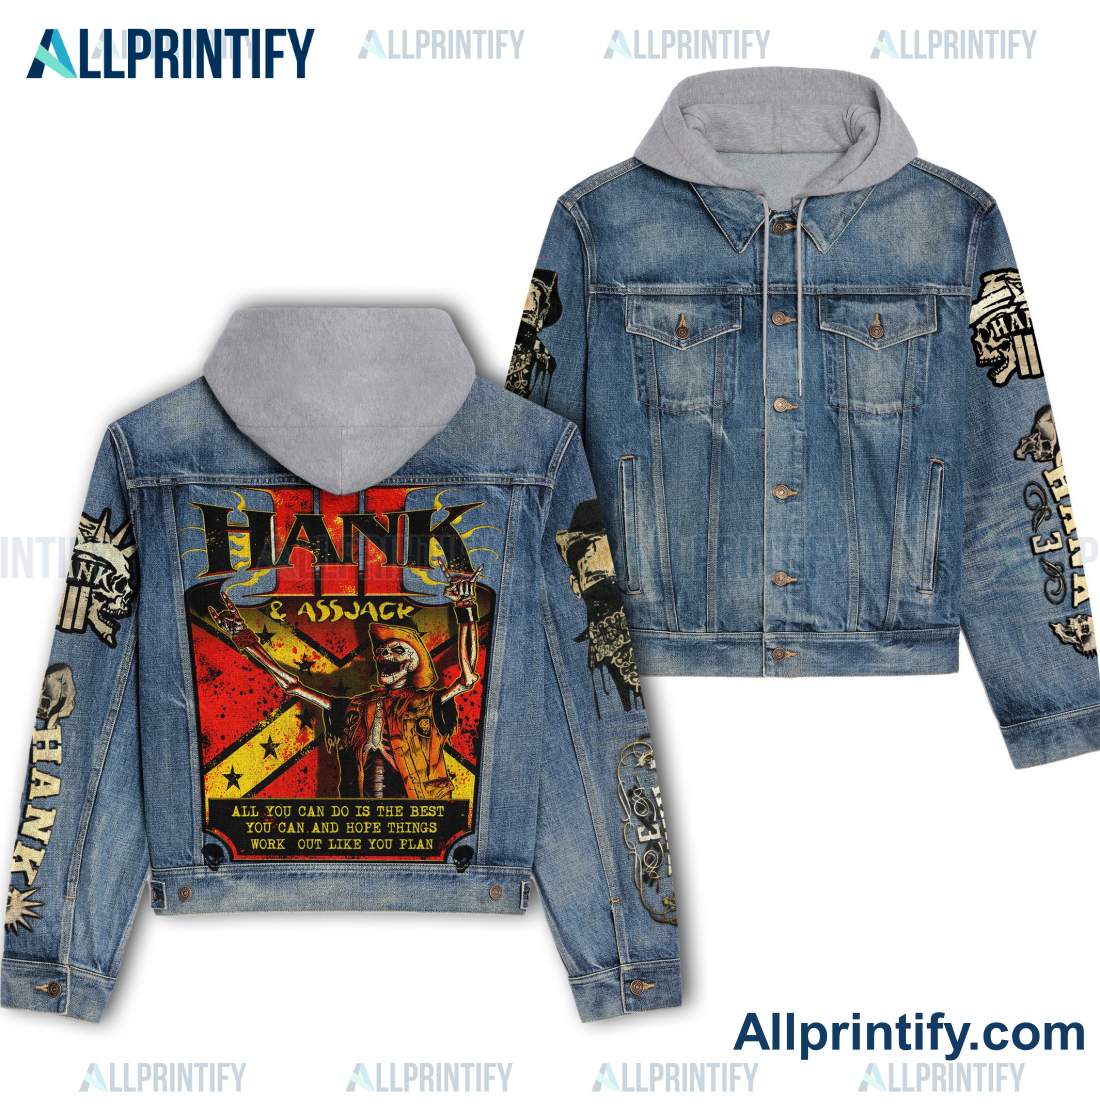 Hank Iii And Assjack All You Can Do Is The Best Hooded Denim Jacket